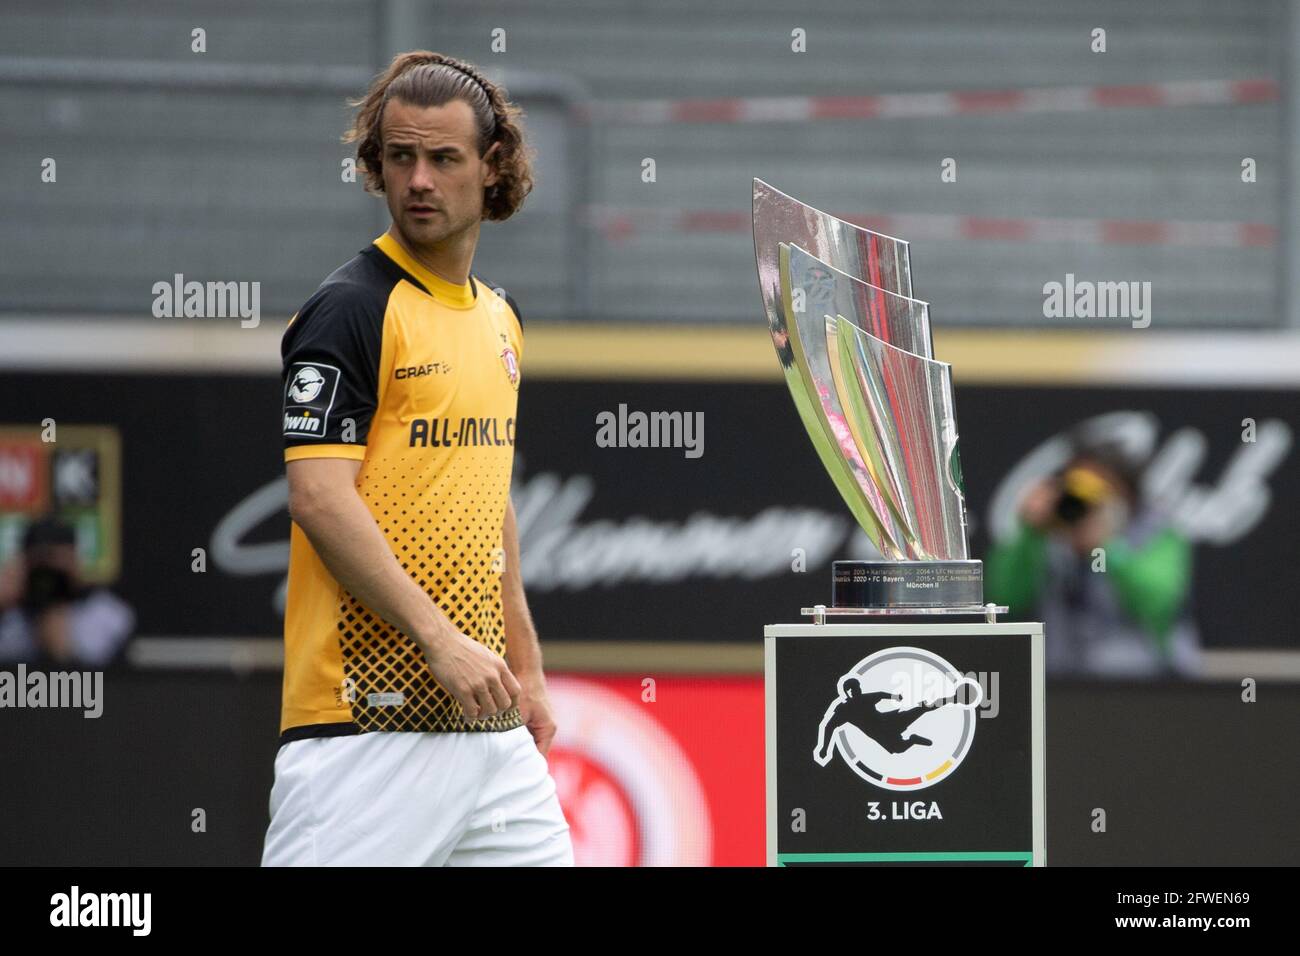 Wiesbaden, Germany. 22nd May, 2021. Football: 3. league, SV Wehen Wiesbaden  - Dynamo Dresden, 38. matchday at BRITA Arena. Dresden's Yannick Stark  passes the champions' trophy of the Third Division. Credit: Sebastian